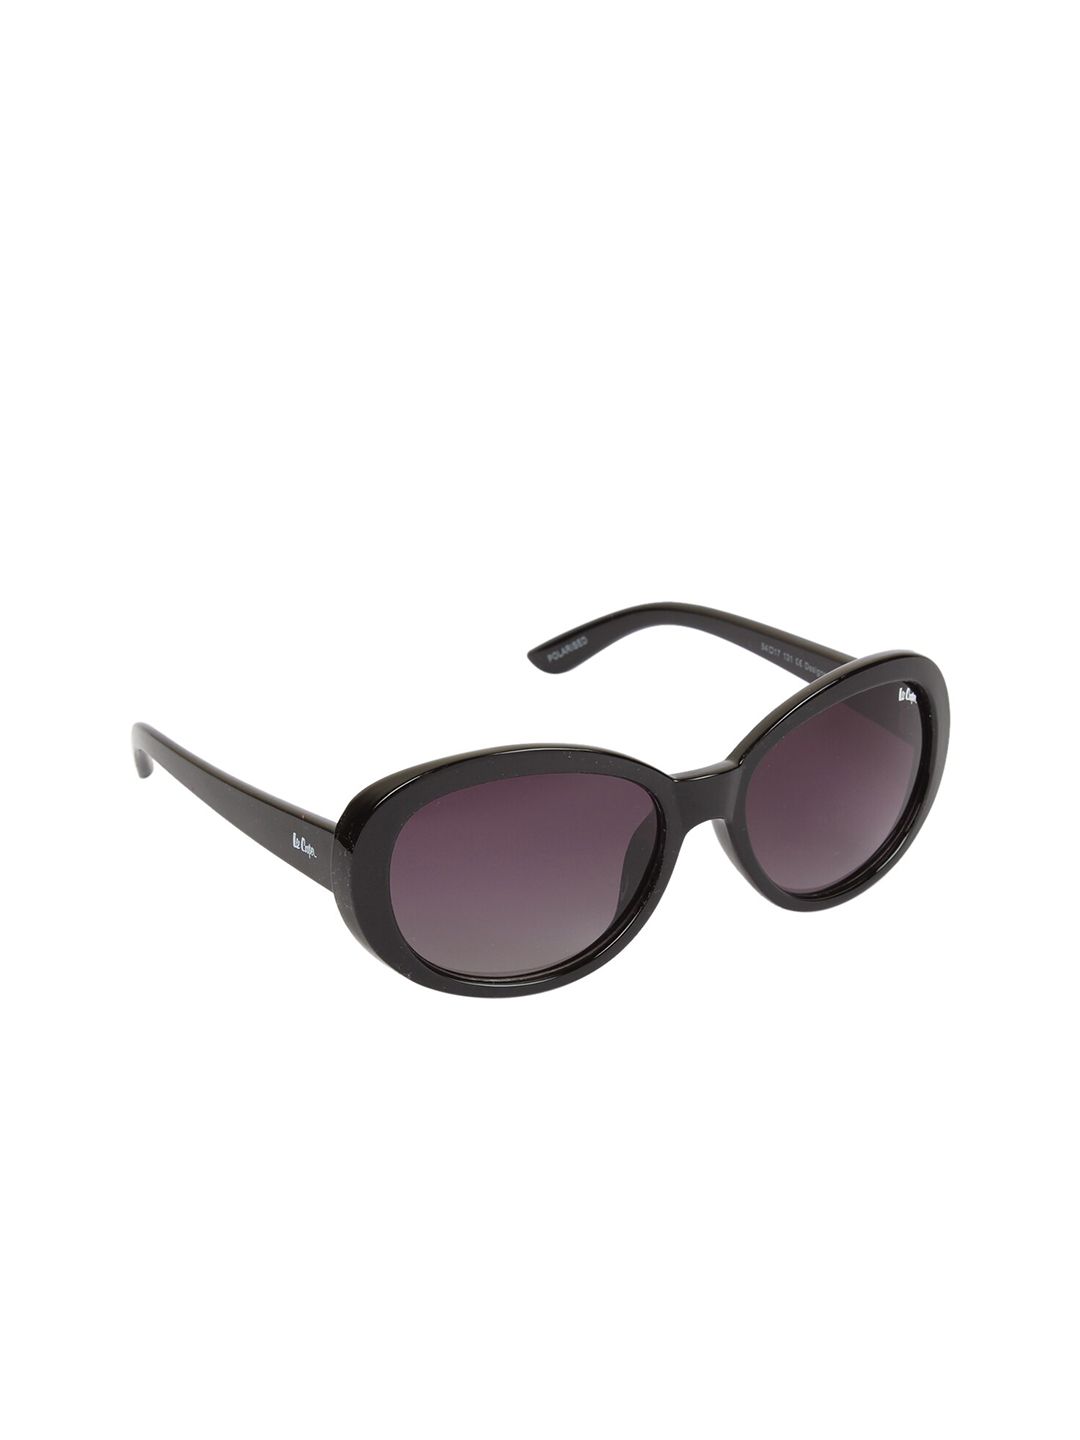 Lee Cooper Women Grey Lens & Black Oval Sunglasses with Polarised Lens Price in India